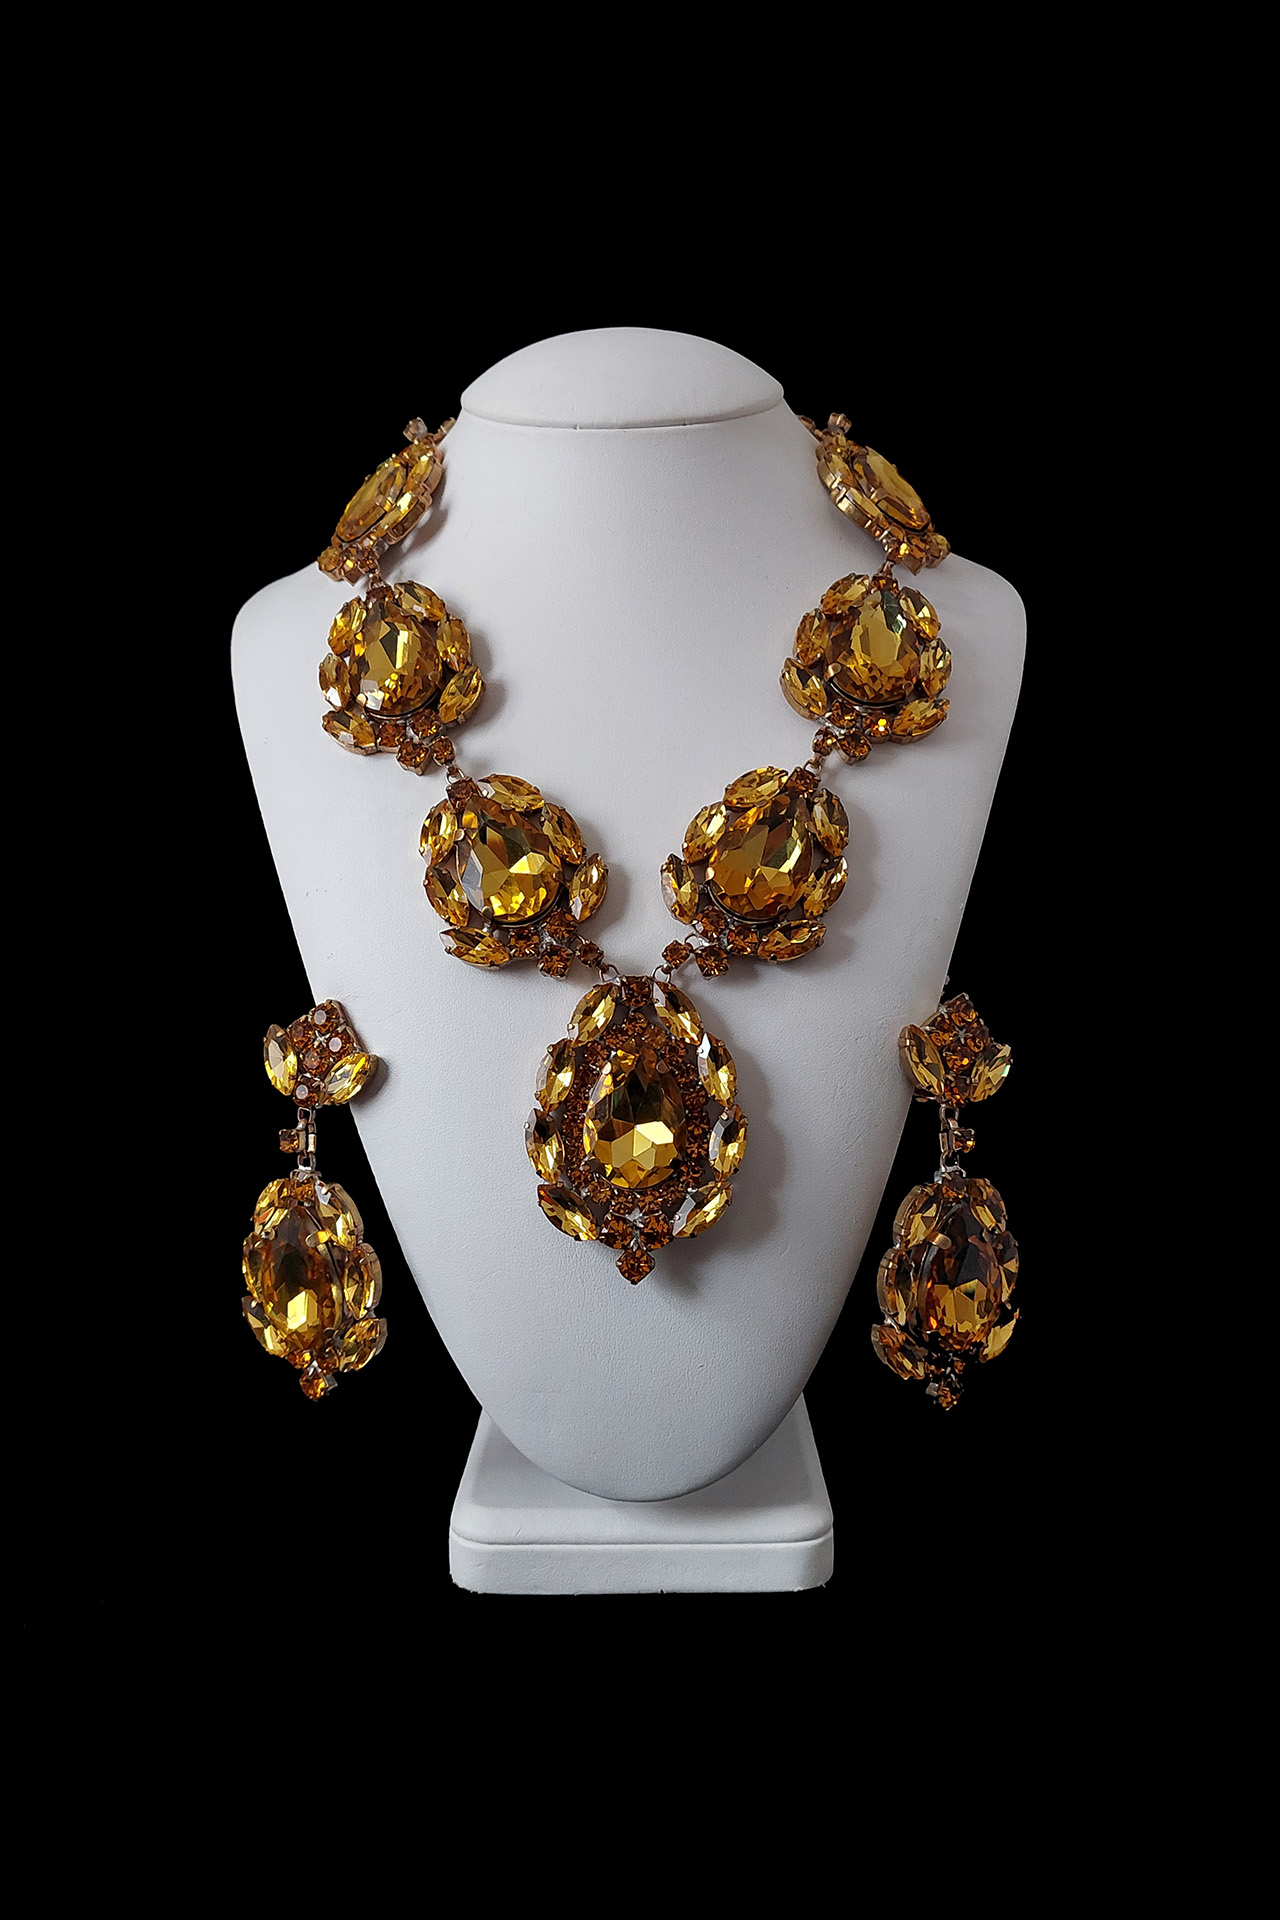 Handmade gold necklace and earrings set Sonatine